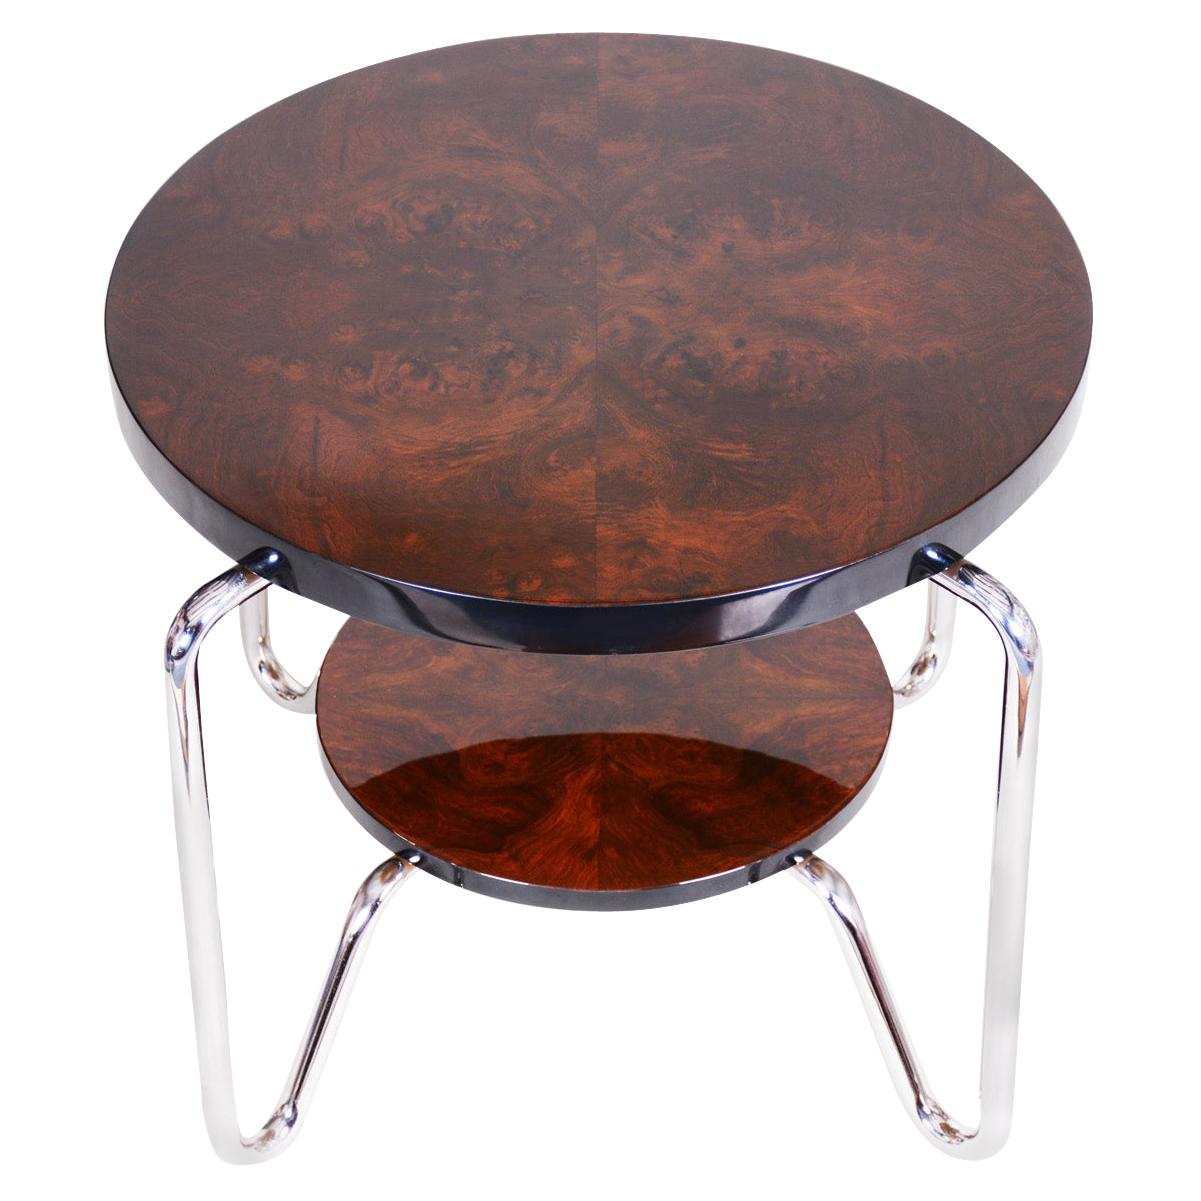 Unique Bauhaus Small Tall Side Table, Chrome and Lacquered Wood, Kovona, 1950s